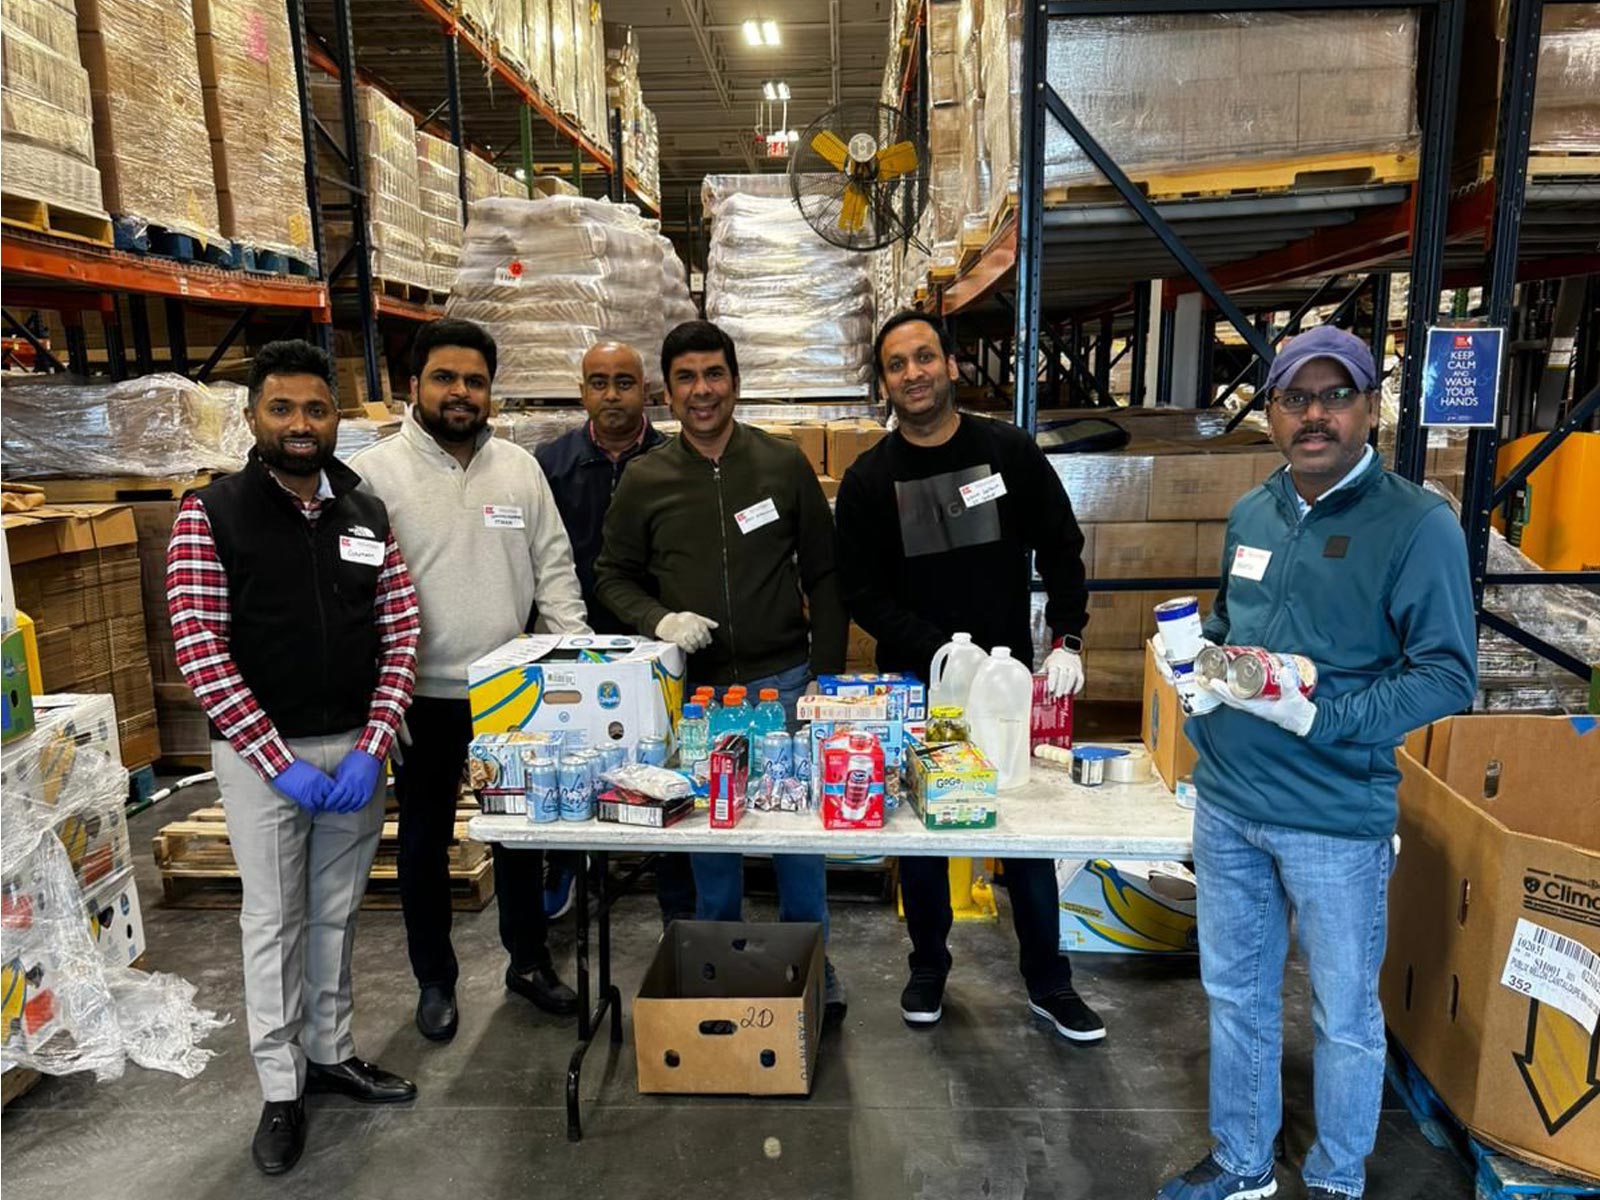 The ITServe Charlotte Chapter supported Second Harvest Food Bank